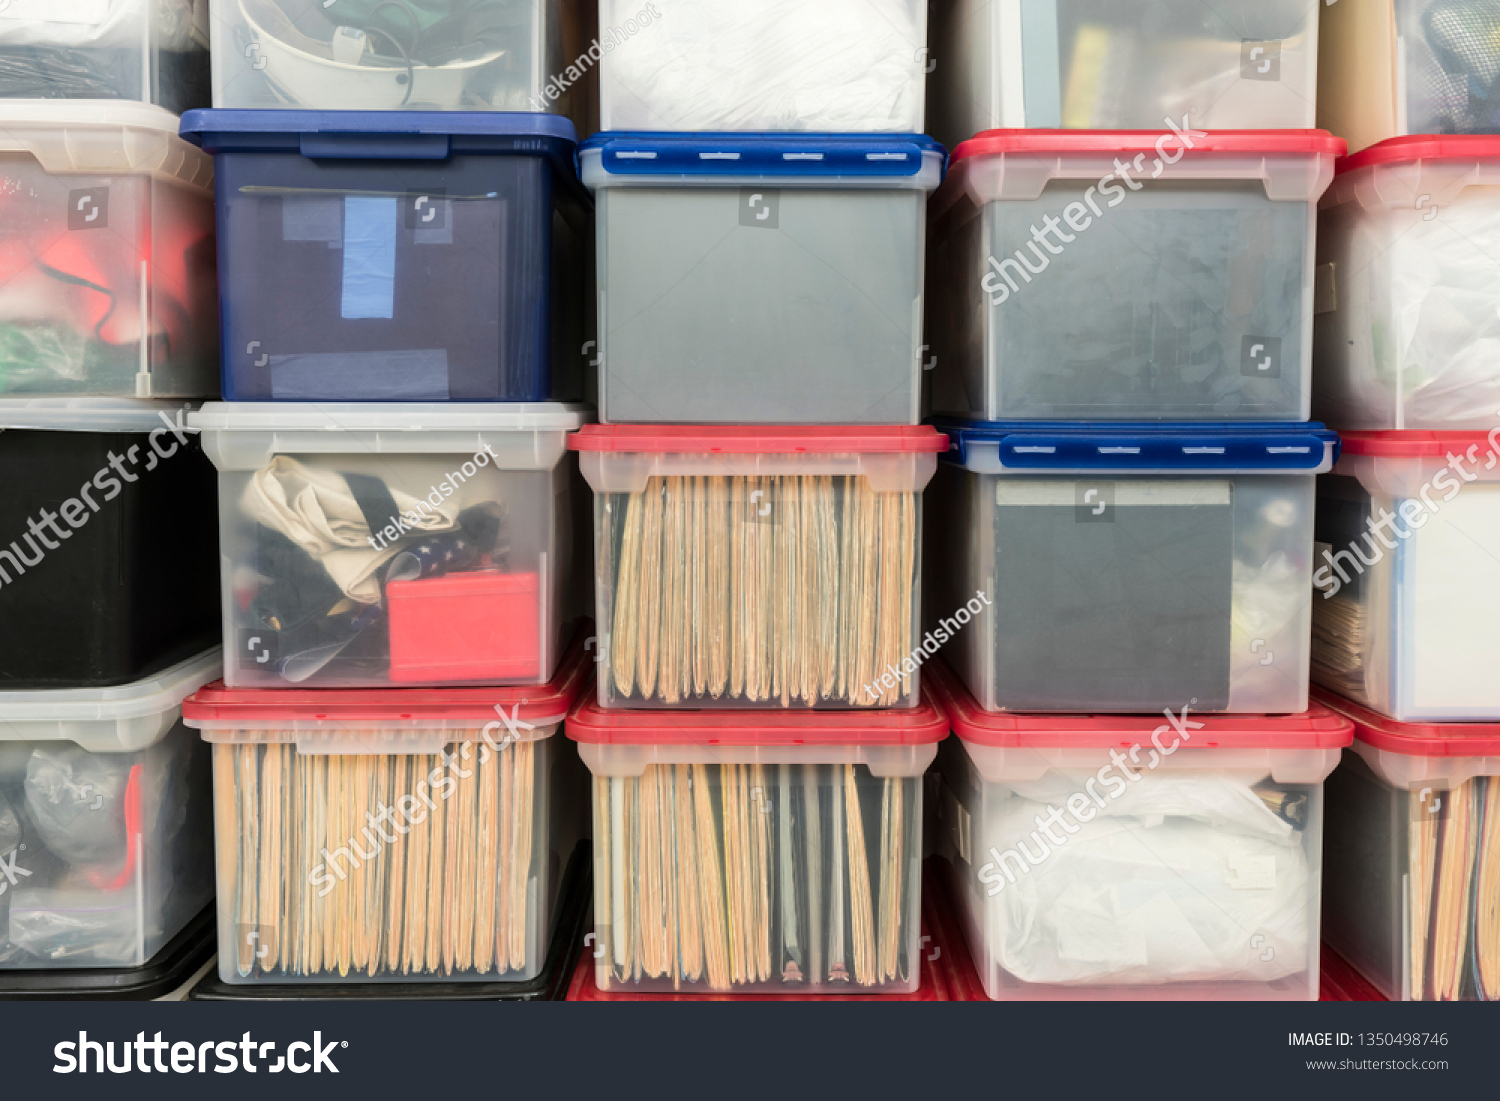 Stacked plastic file storage boxes with folders, binders and miscellaneous items.   #1350498746